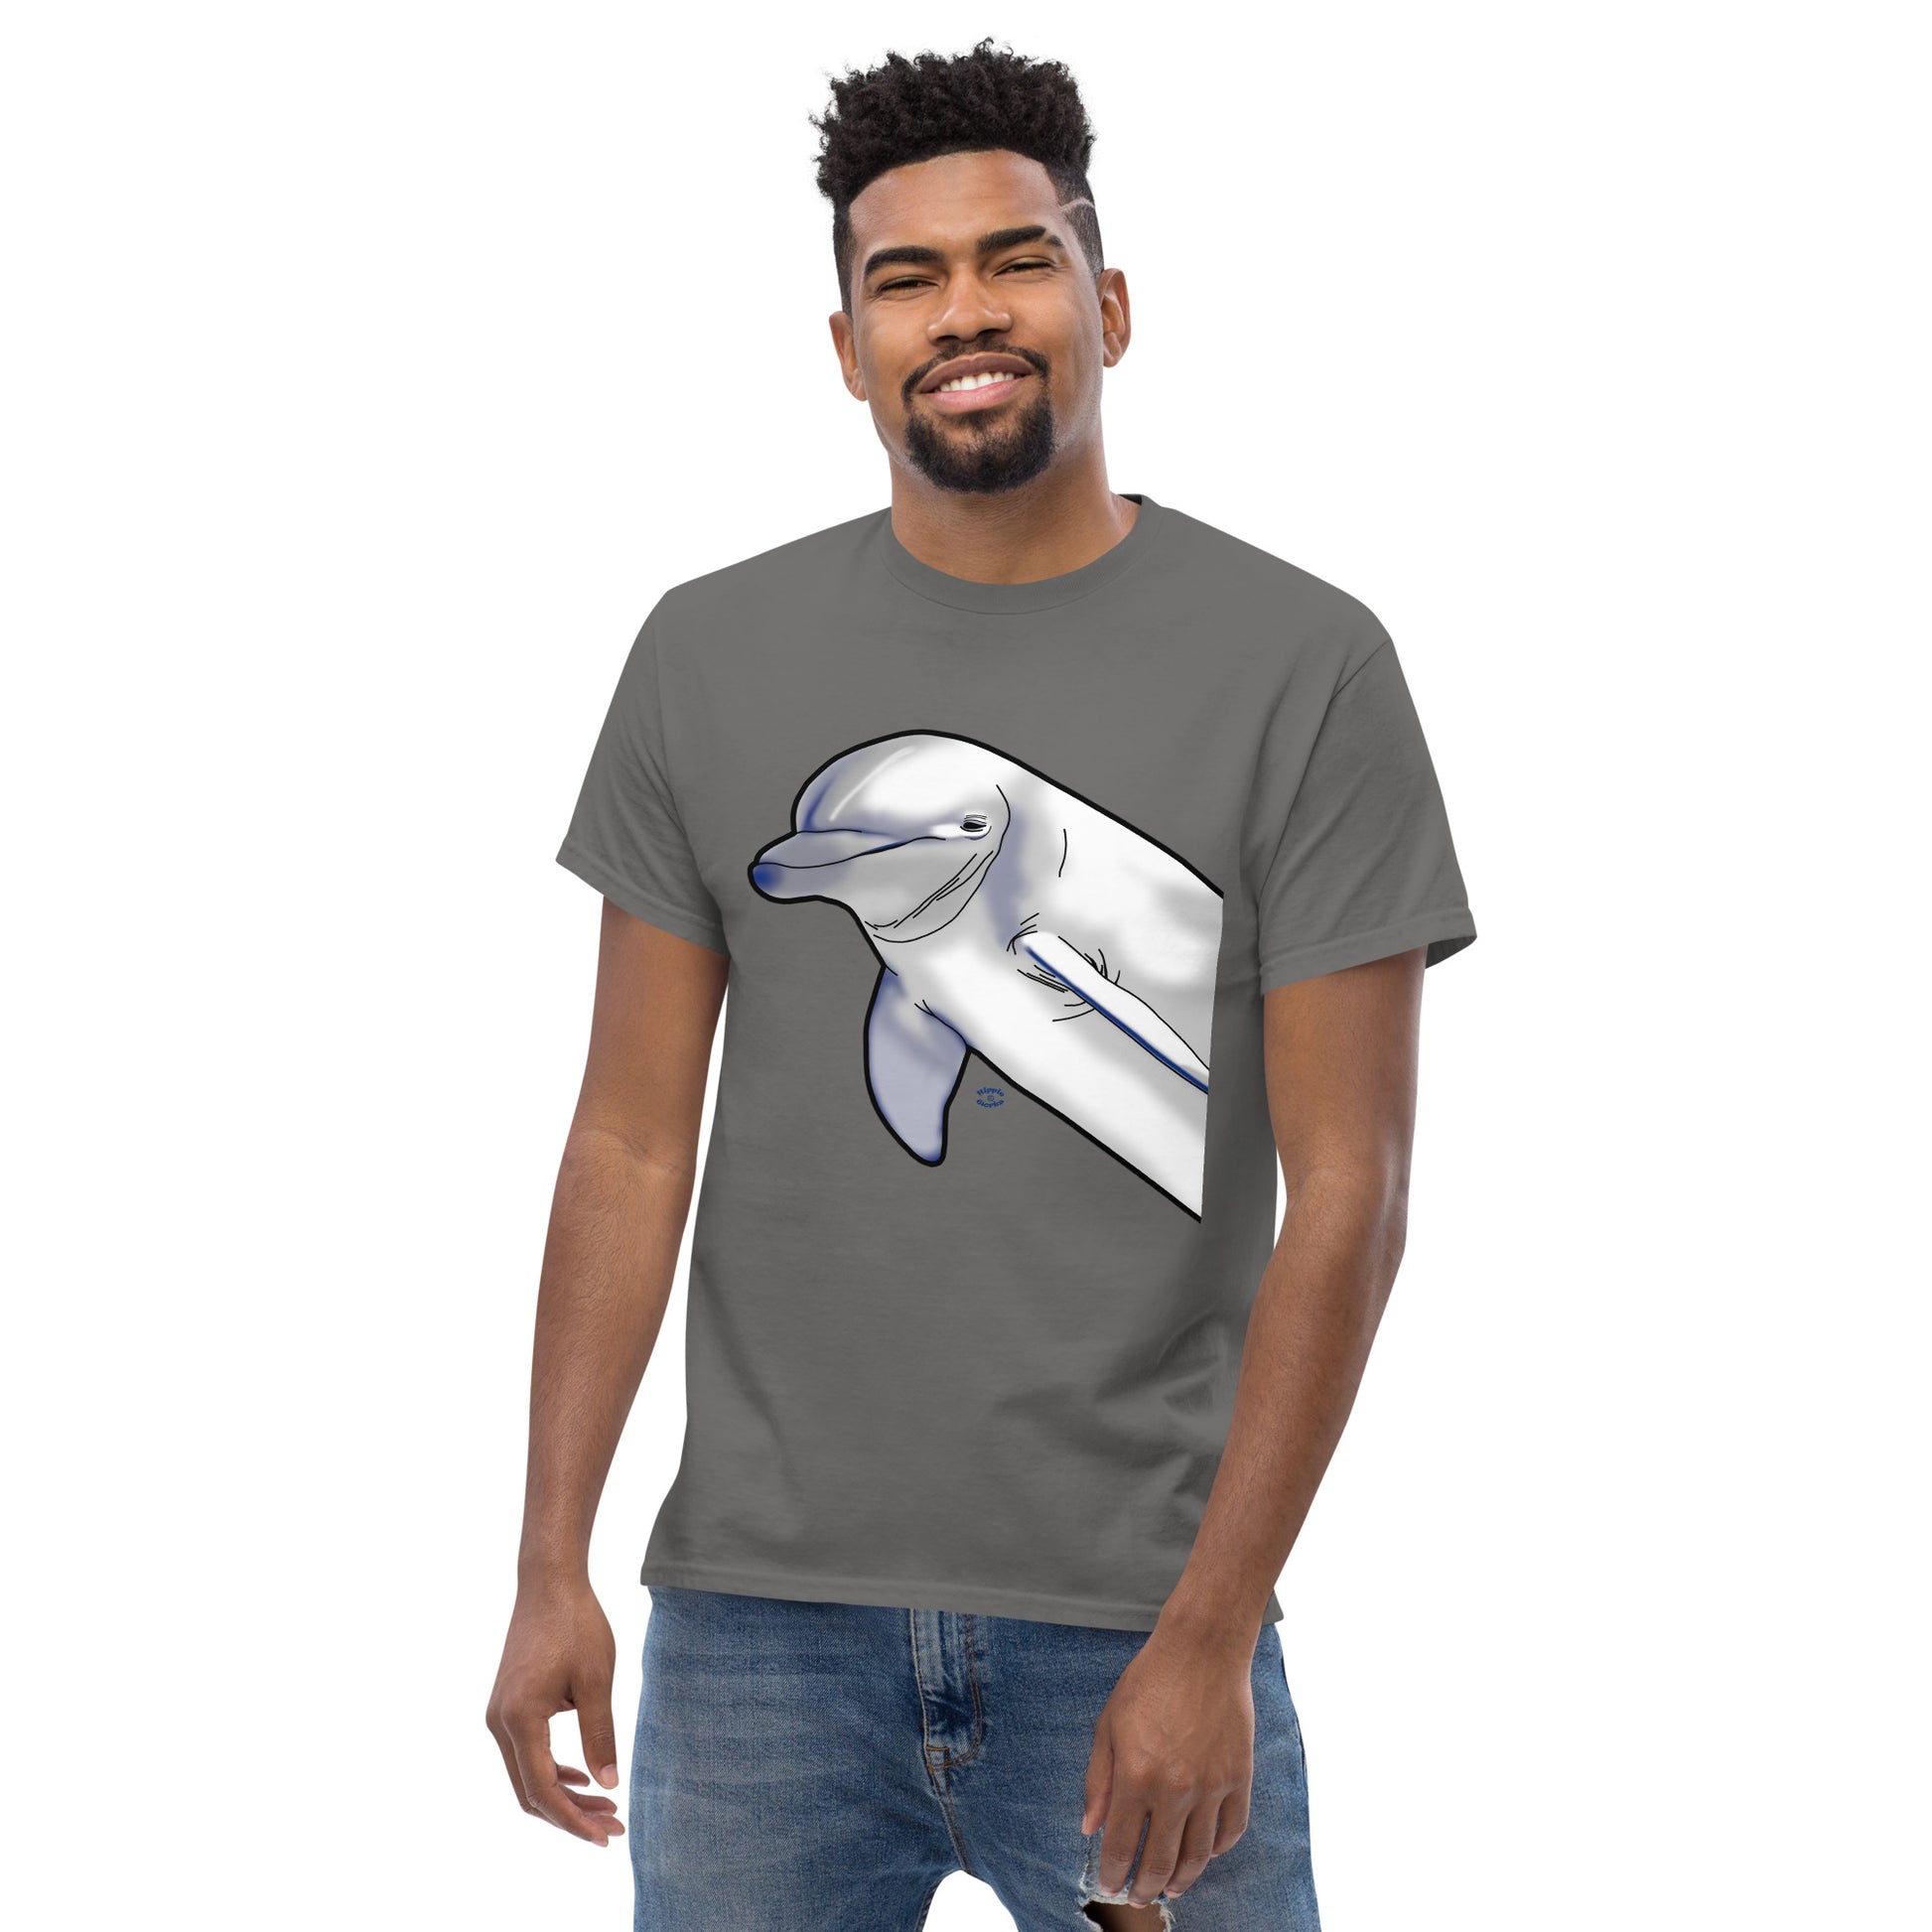 A picture of a man wearing a short sleeve tshirt with a printed picture of a dolphin - front side charcoal